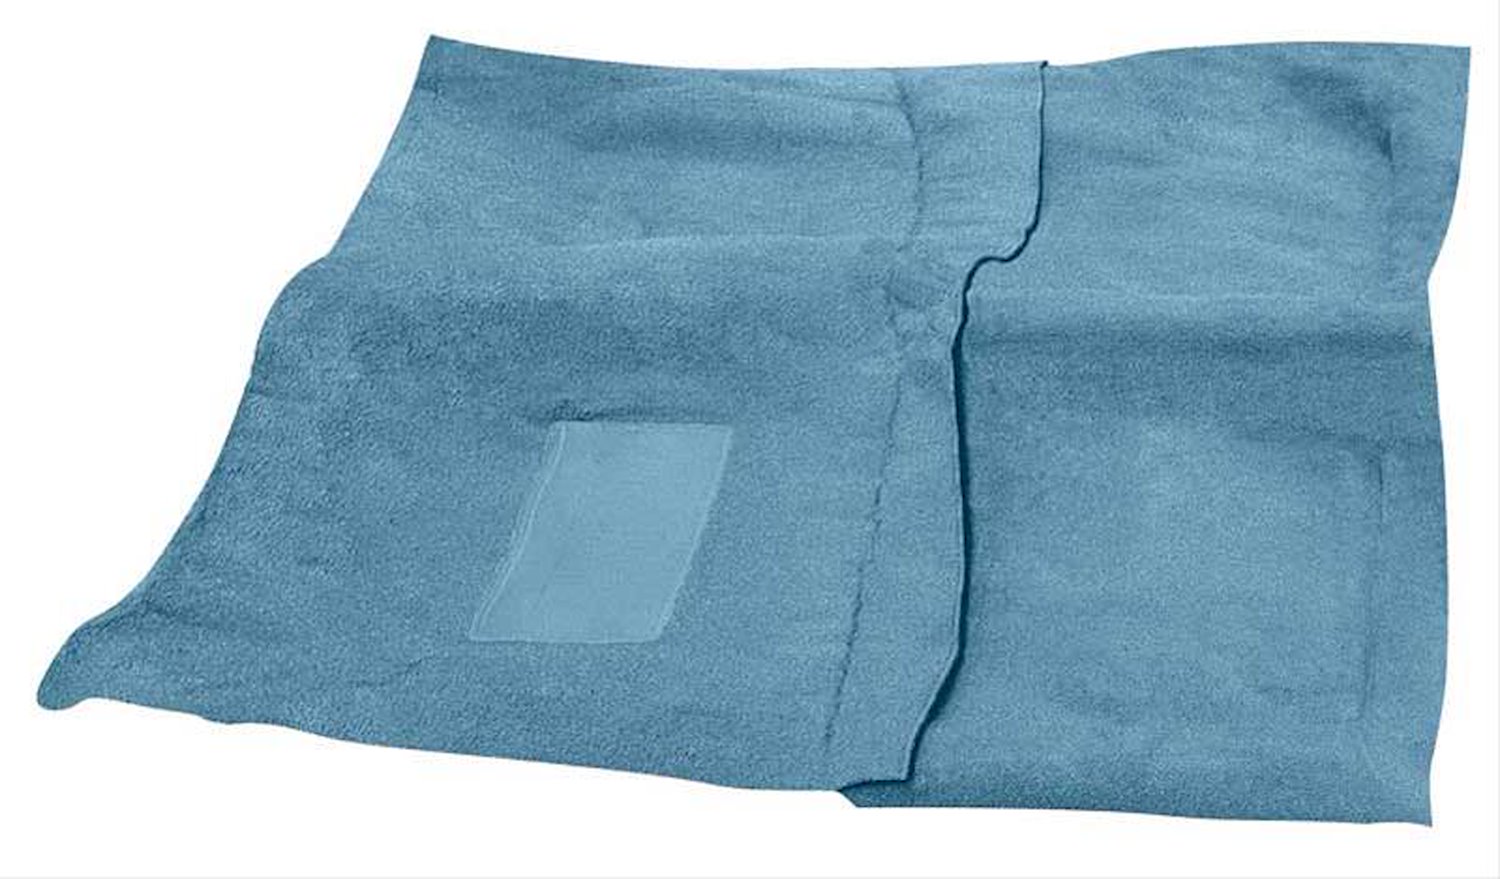 MA531515 Loop Carpet With Tails 1967-69 Dodge Dart Convertible With Auto Trans Teal Blue